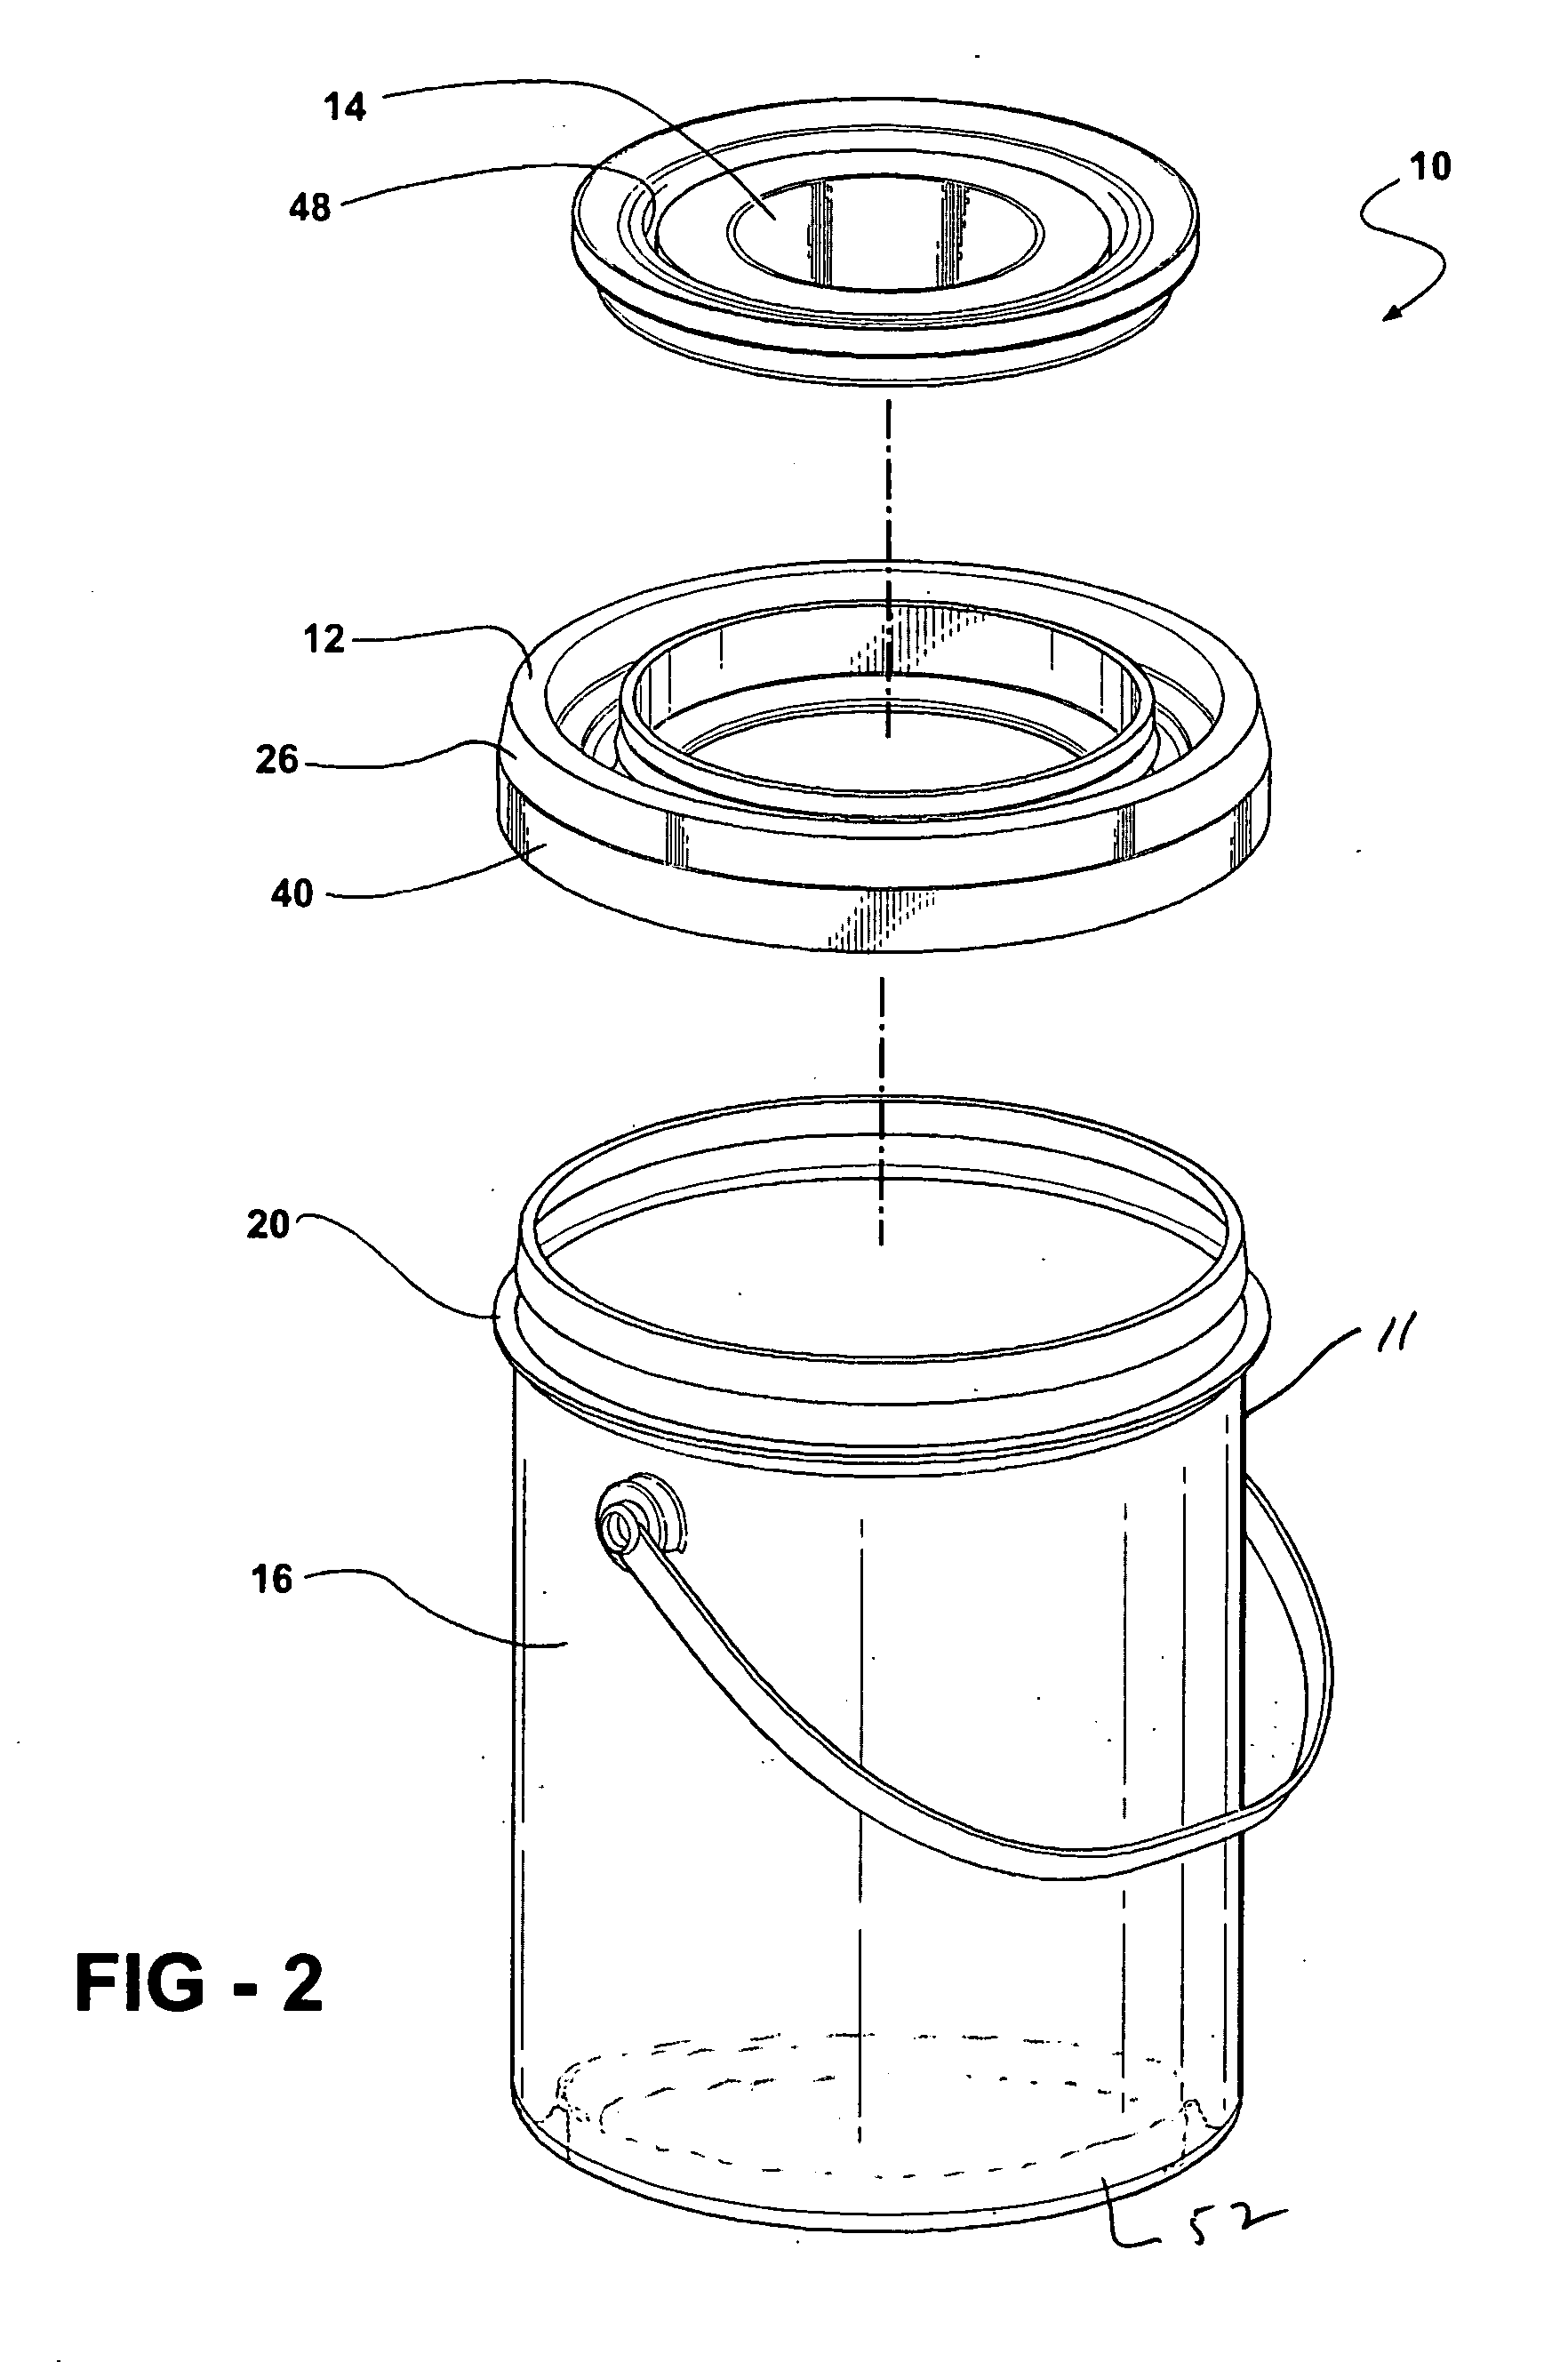 Molded plastic container combination including a snap-on snap ring